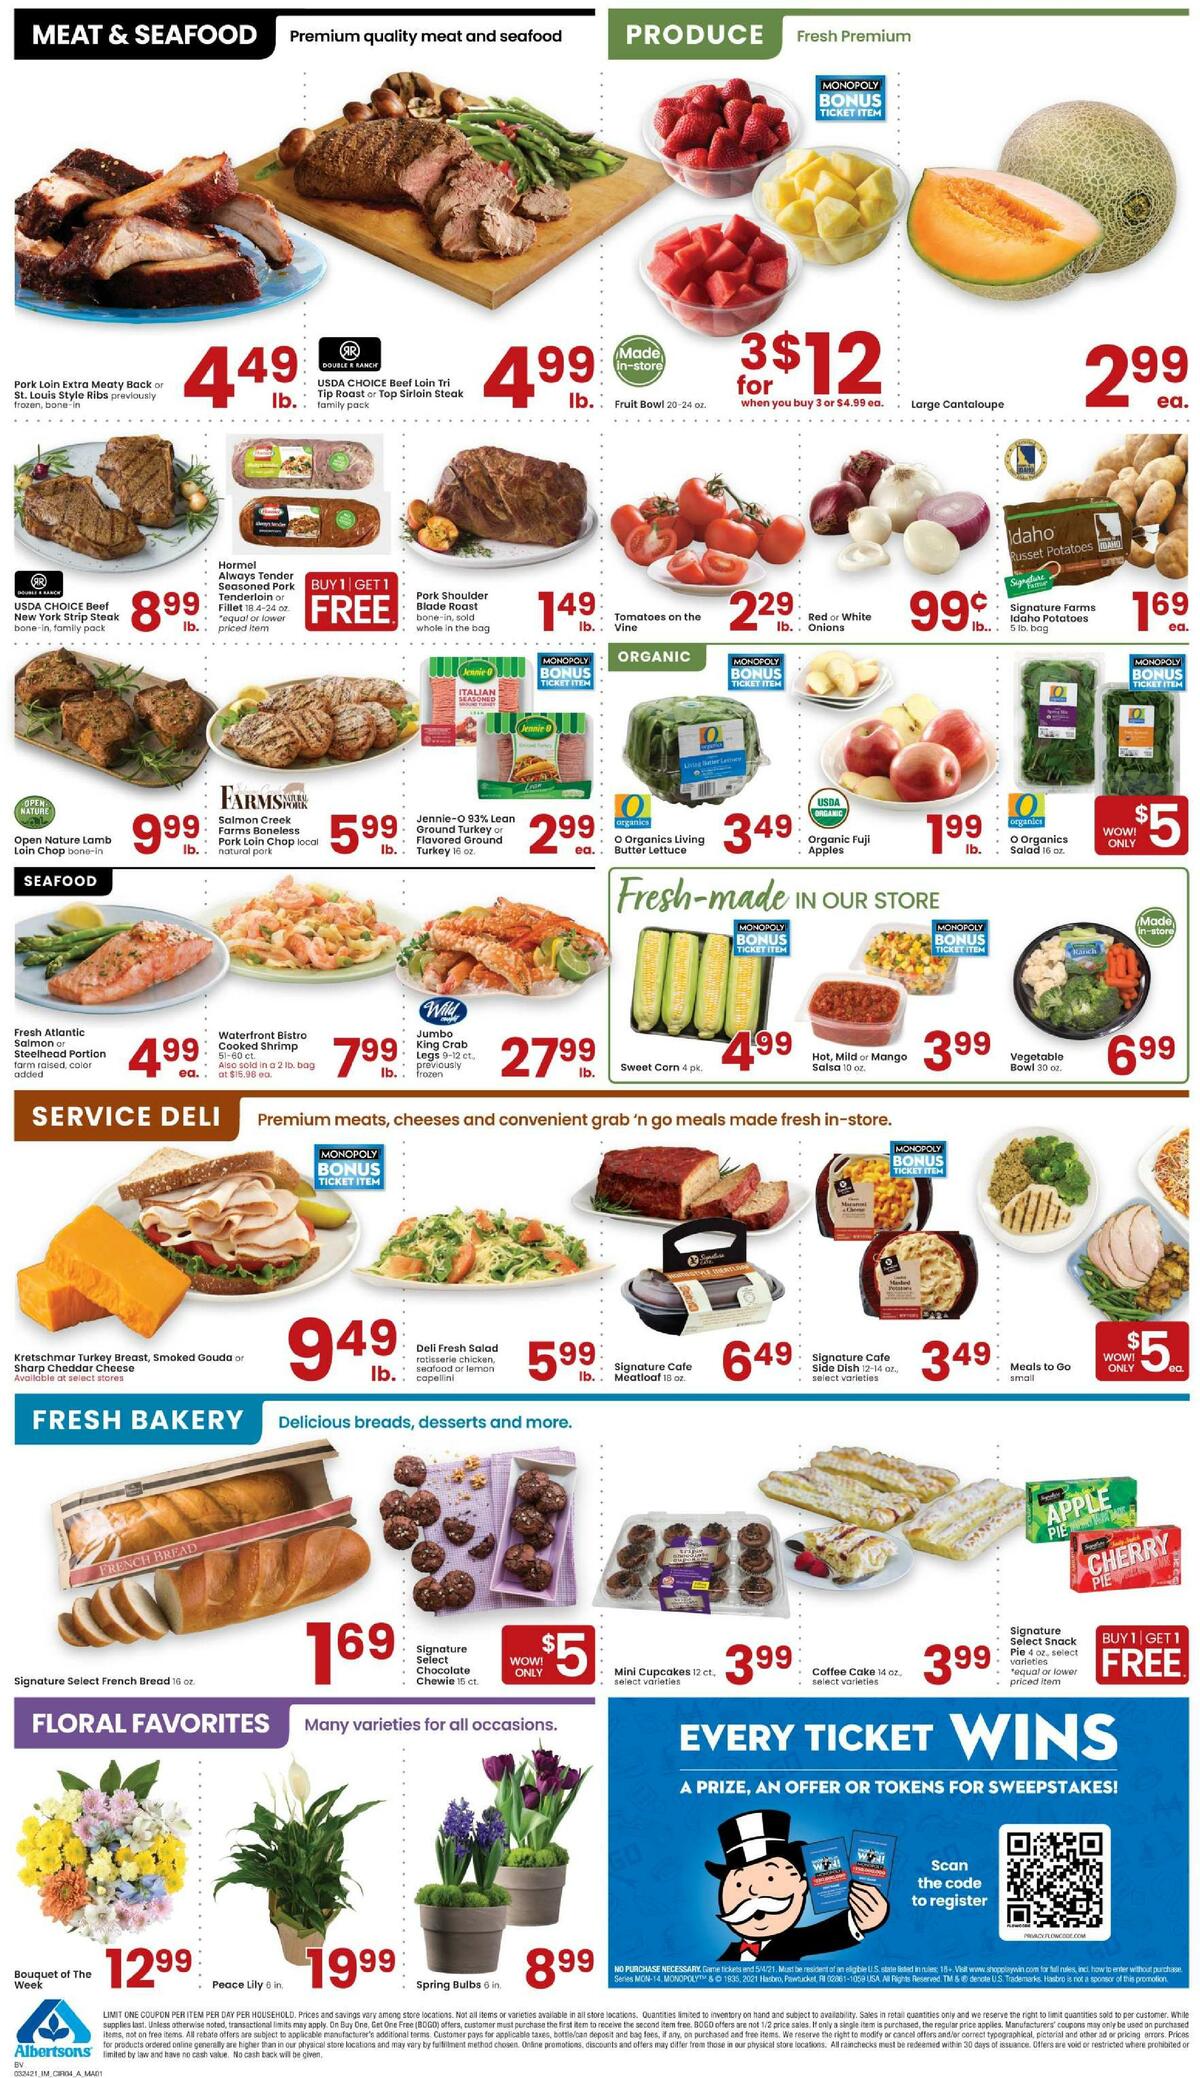 Albertsons Weekly Ad from March 24